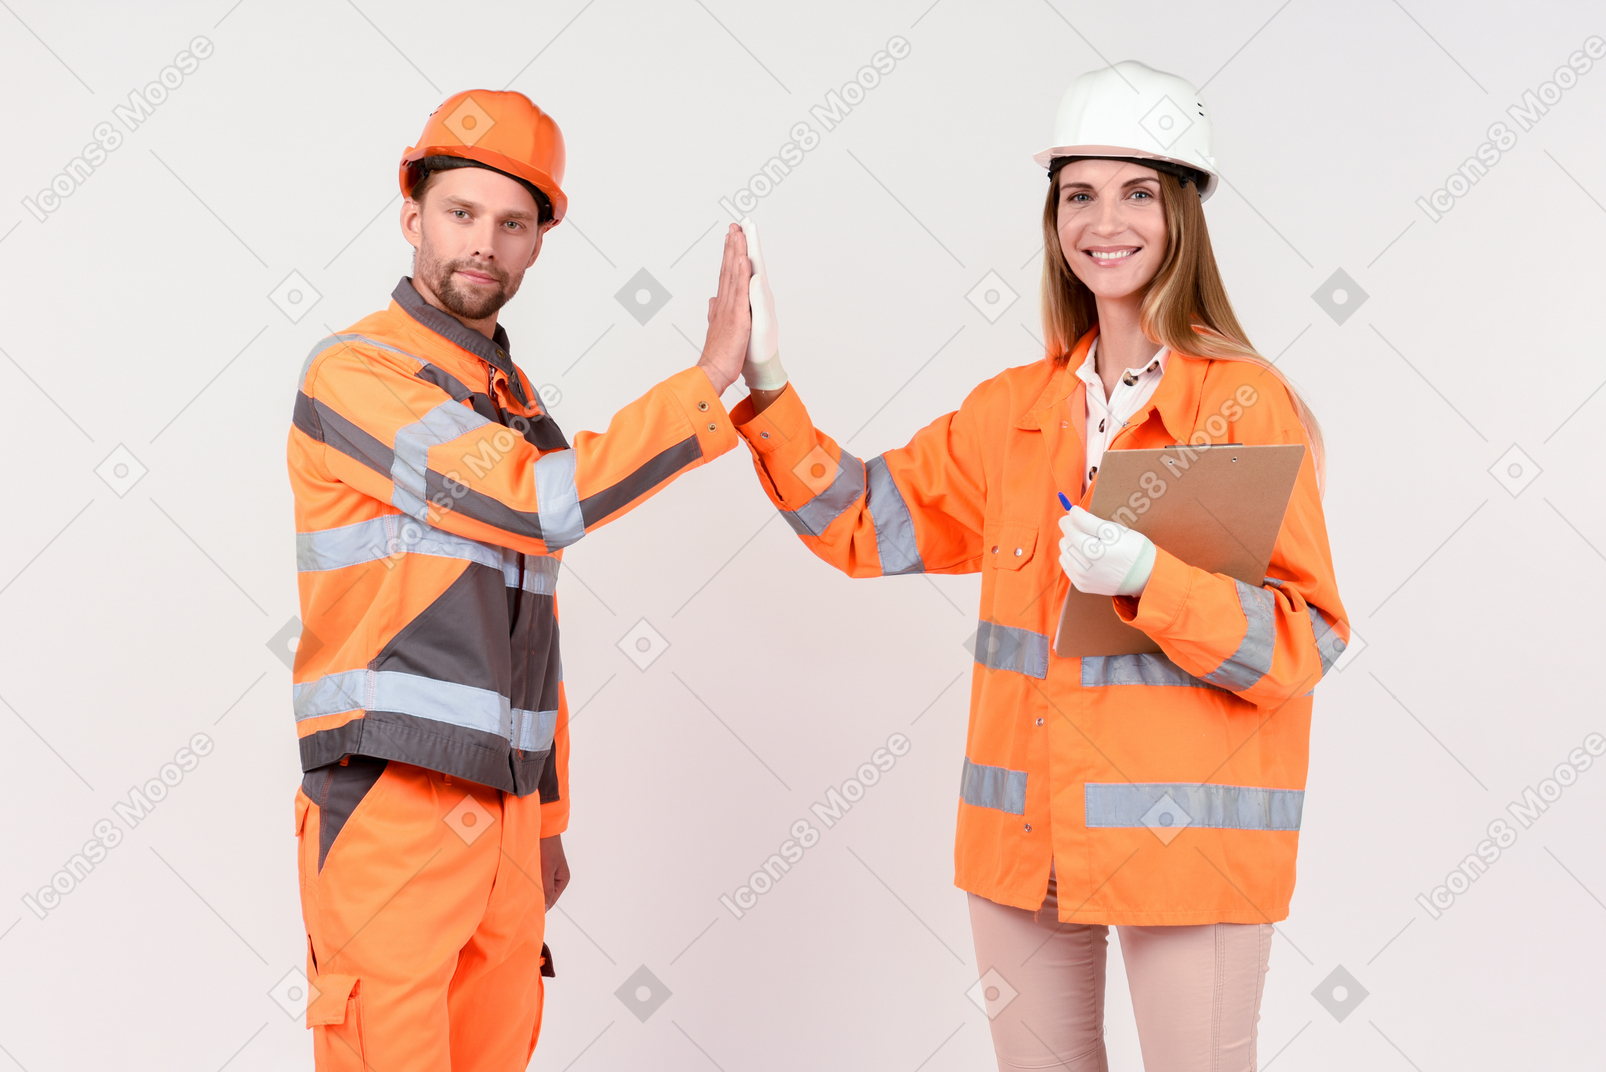 Male and female workers giving high five